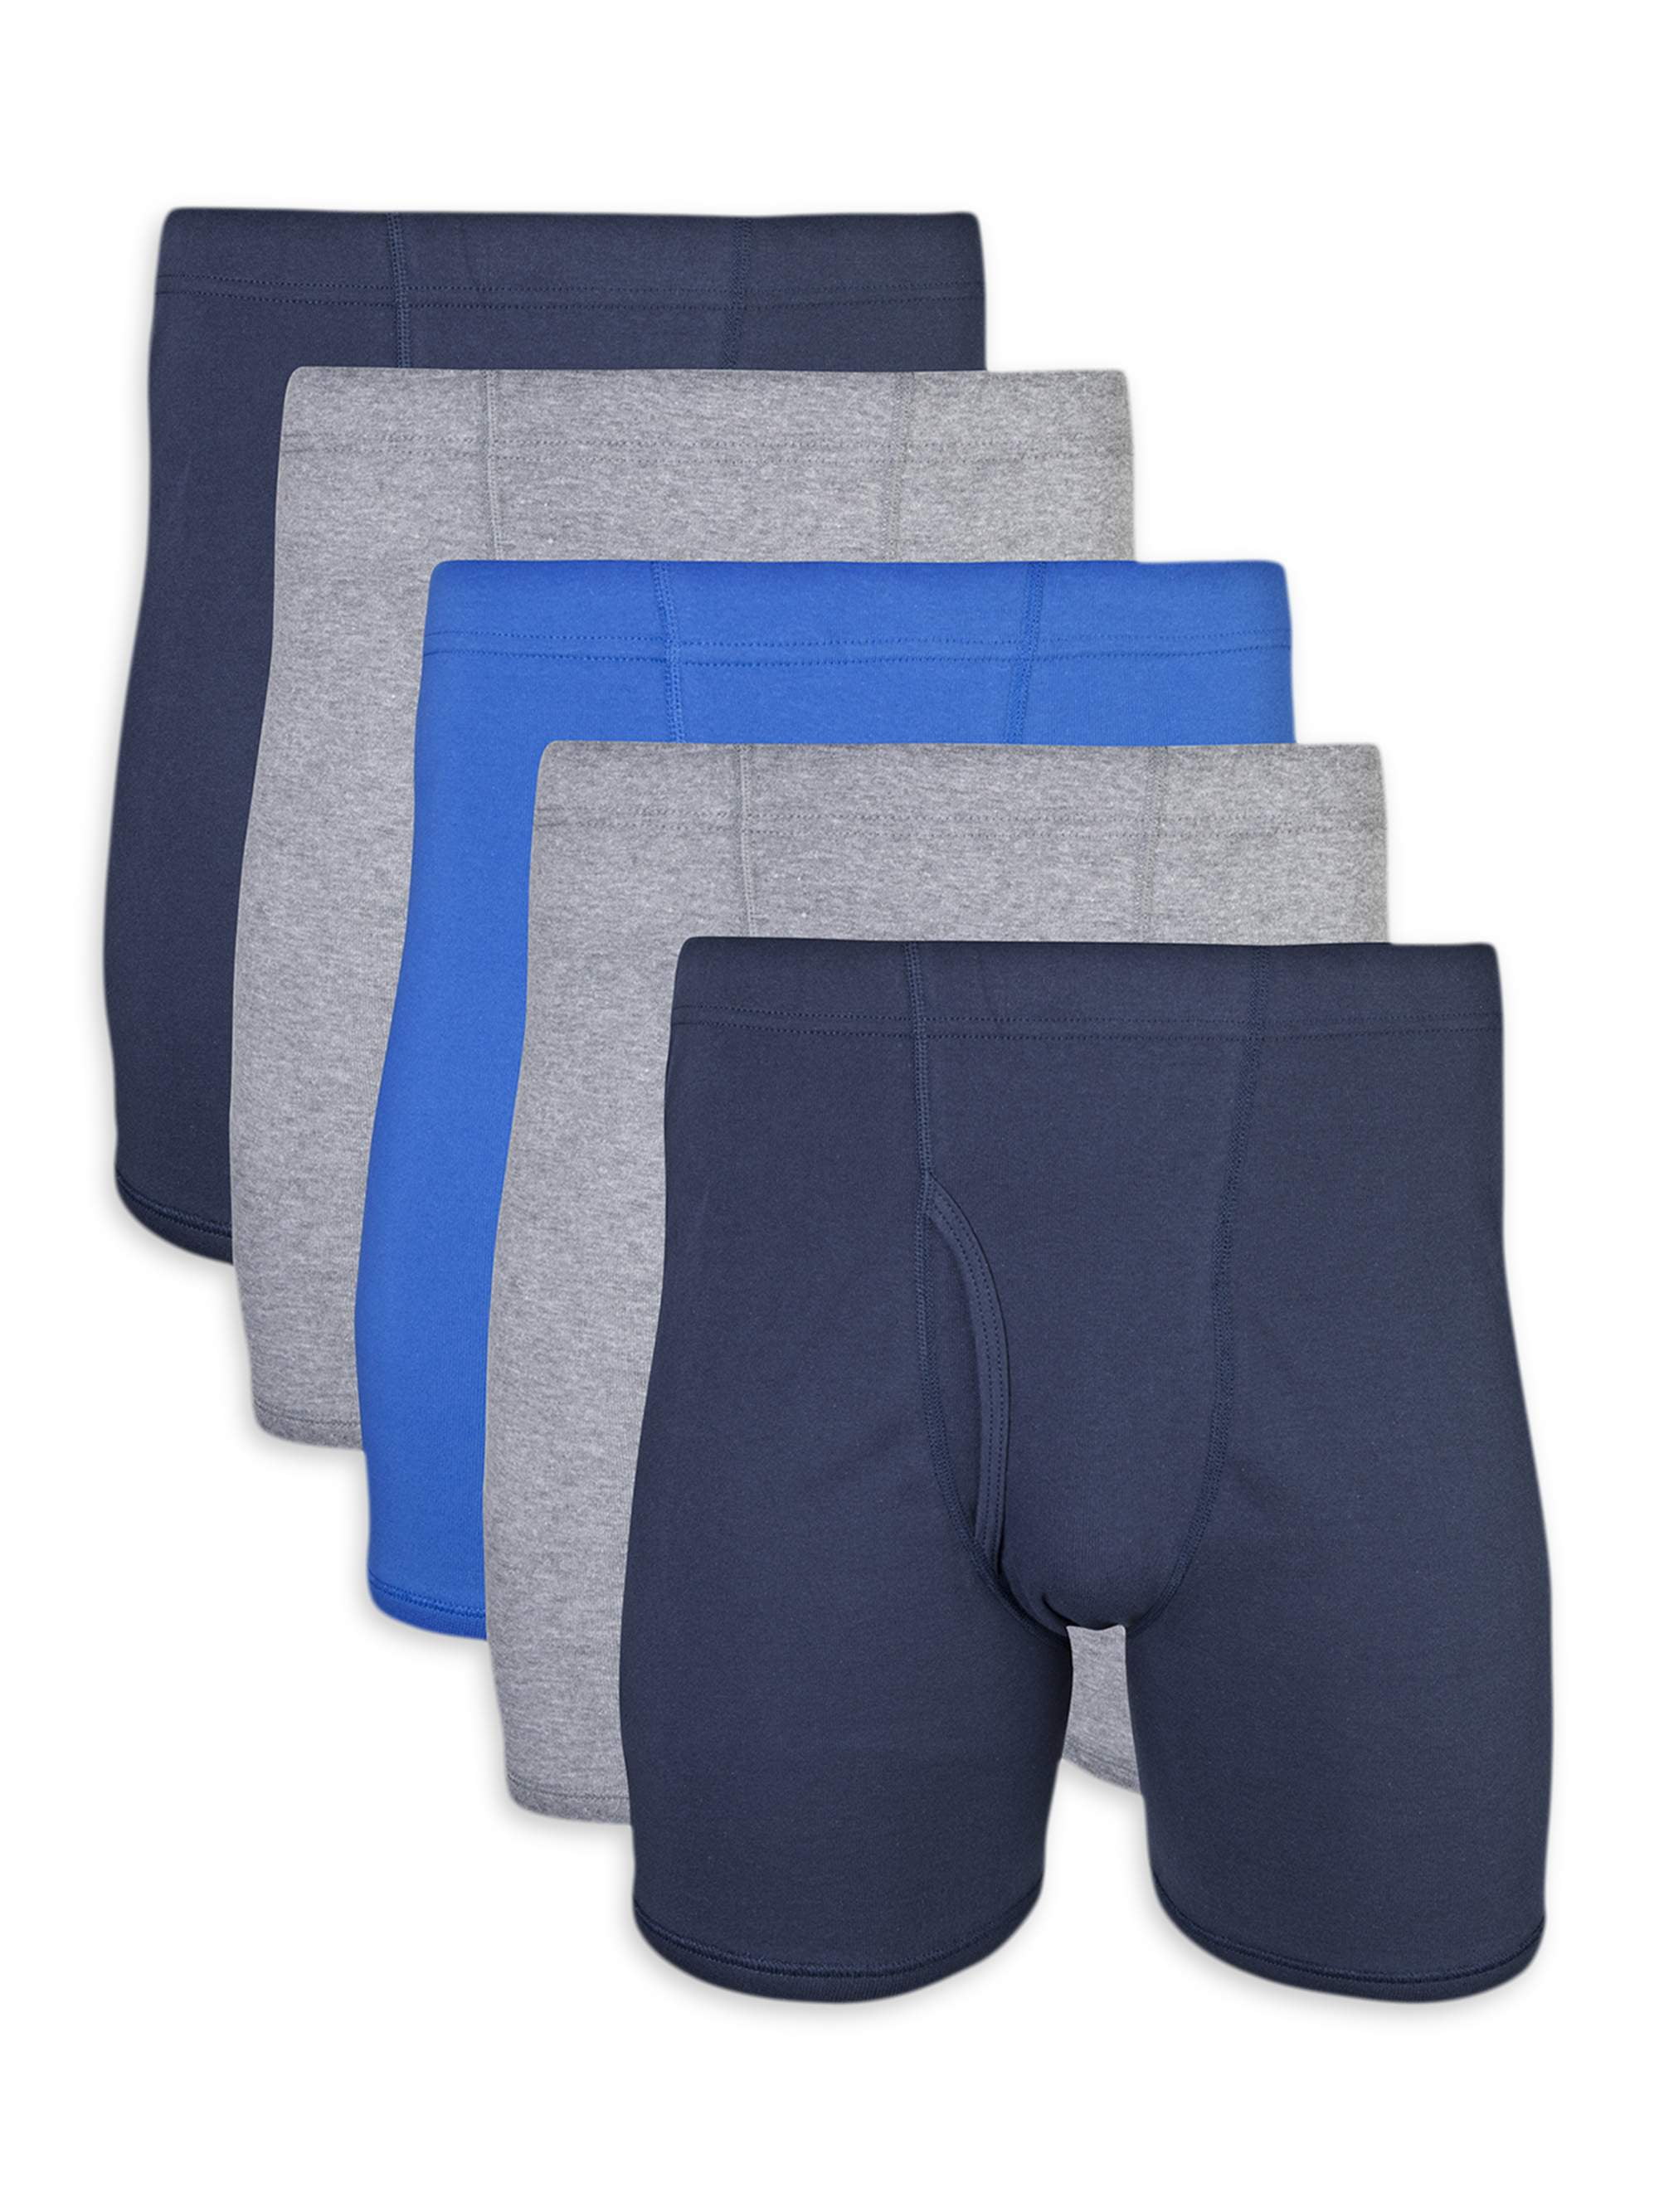 Gildan Adult Men's Boxer Briefs With Covered Waistband, 5-Pack, Sizes  S-2XL, 6 Inseam 